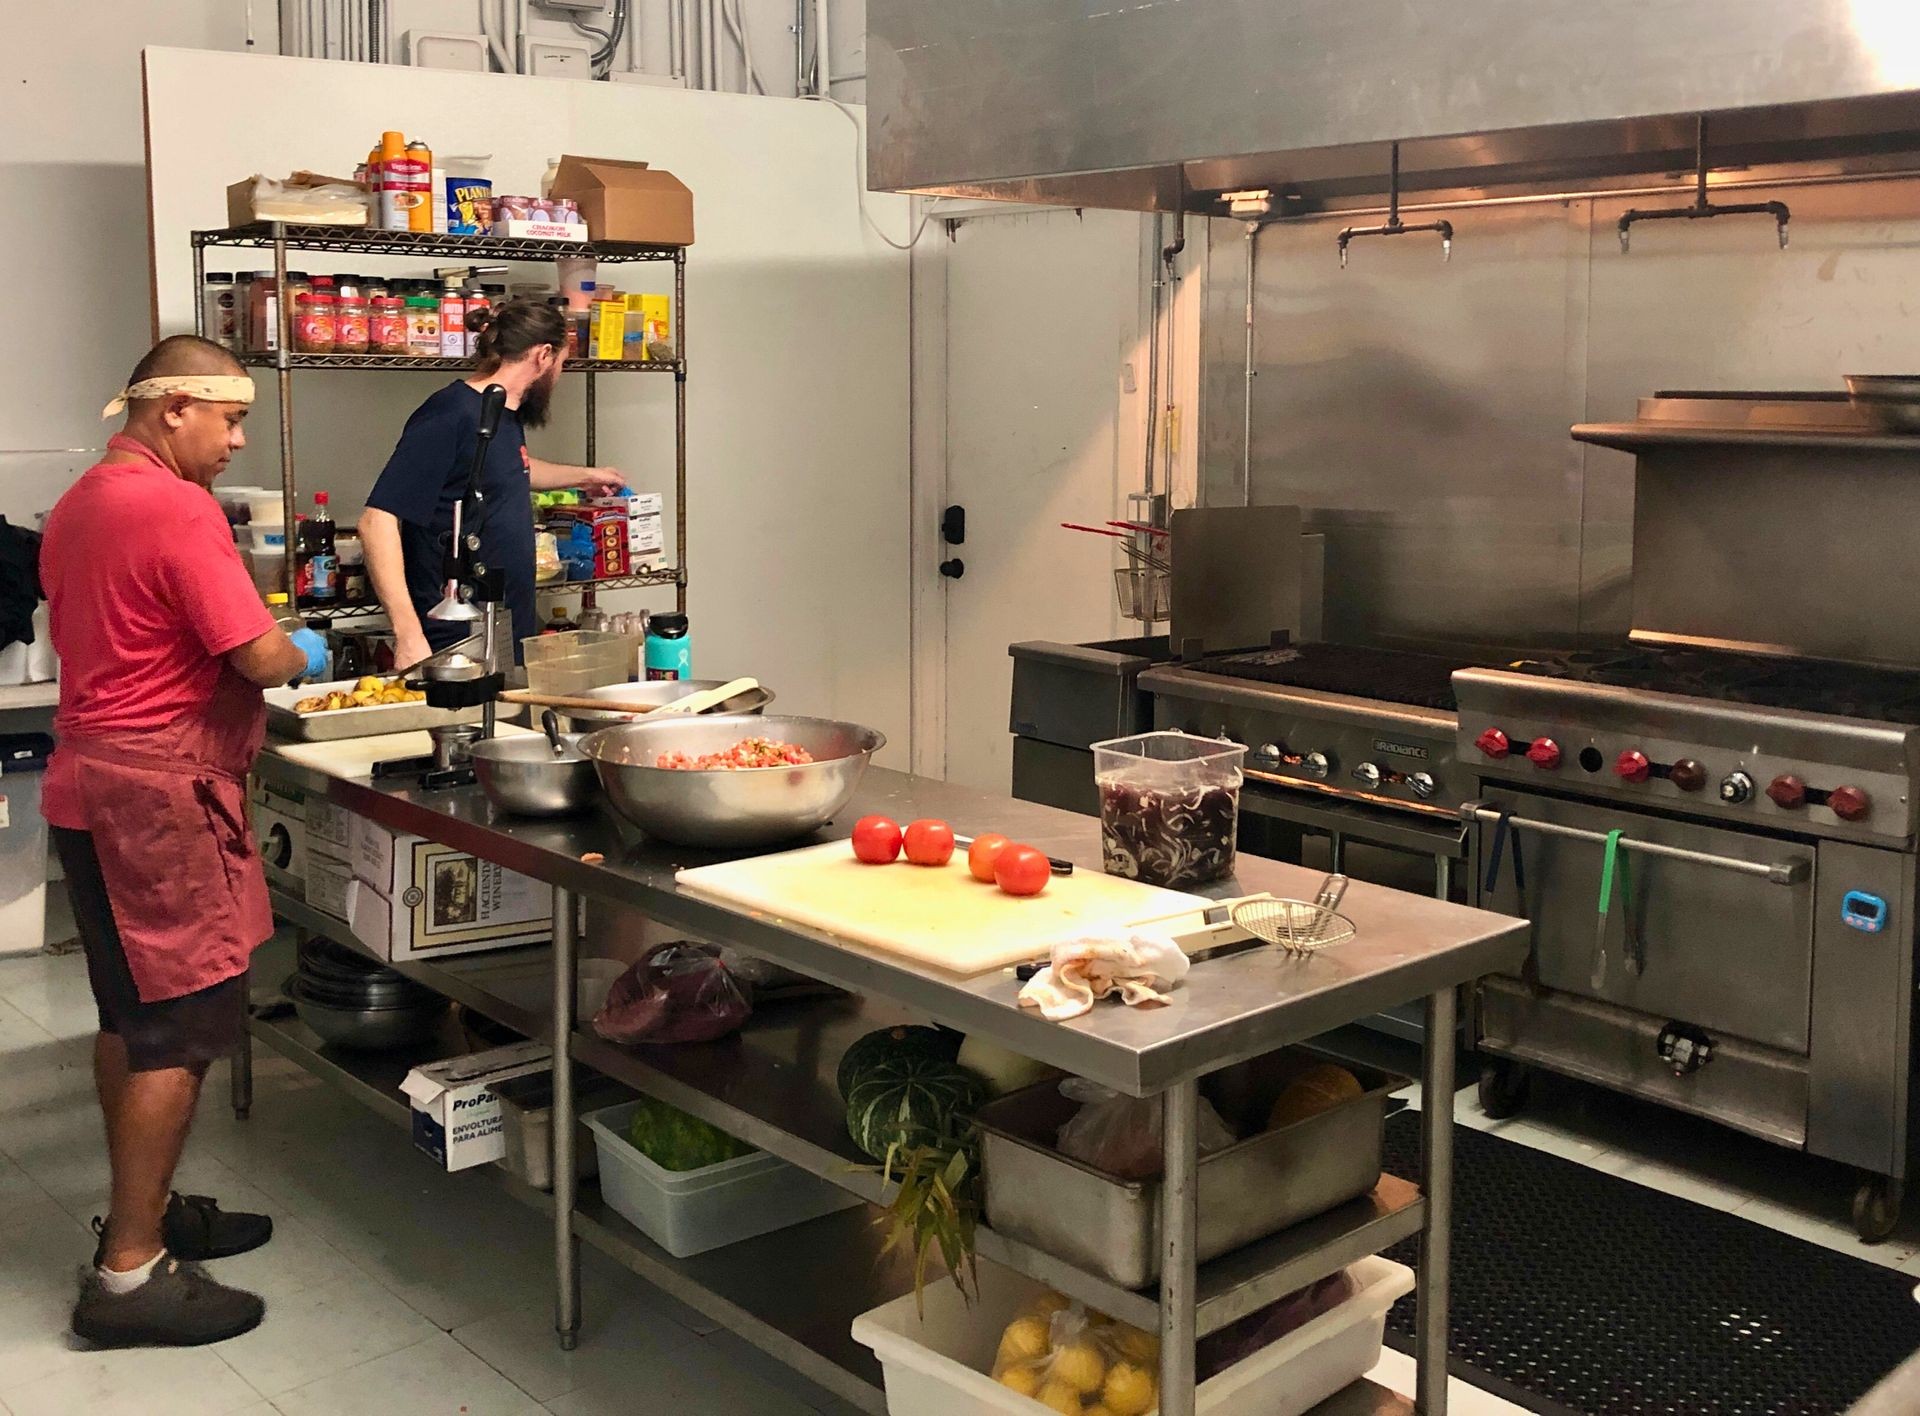 Fully certified commercial kitchen rental facilities in Honolulu, Hawaii